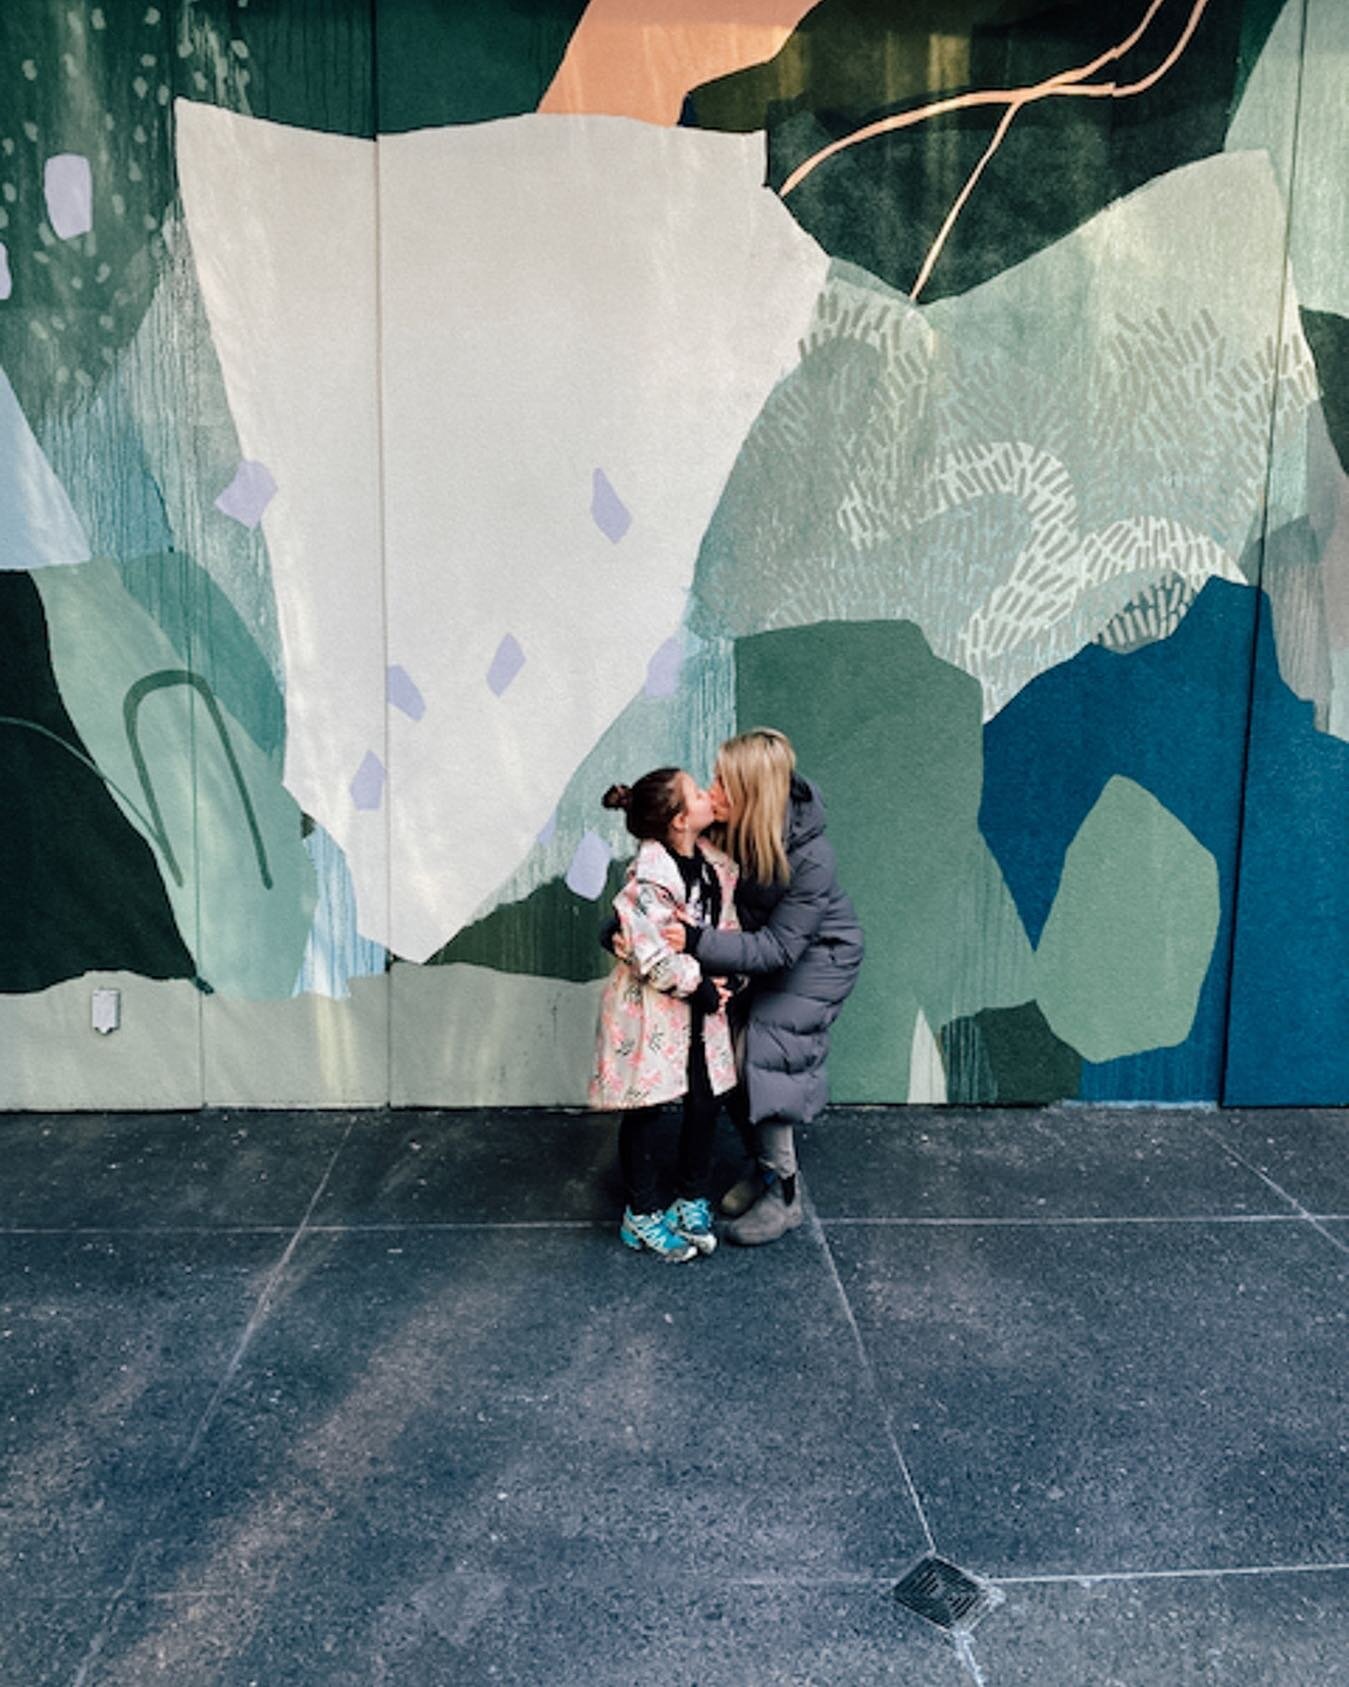 Happy Friday! 
⠀⠀⠀⠀⠀⠀⠀⠀⠀
Grateful for my daughter Lynden, who turned me into a mother. I cherish moments creating with her and exploring art together. It was lovely visiting @sarahdelaneyart mural in Vancouver and my husband capturing this moment. 
⠀